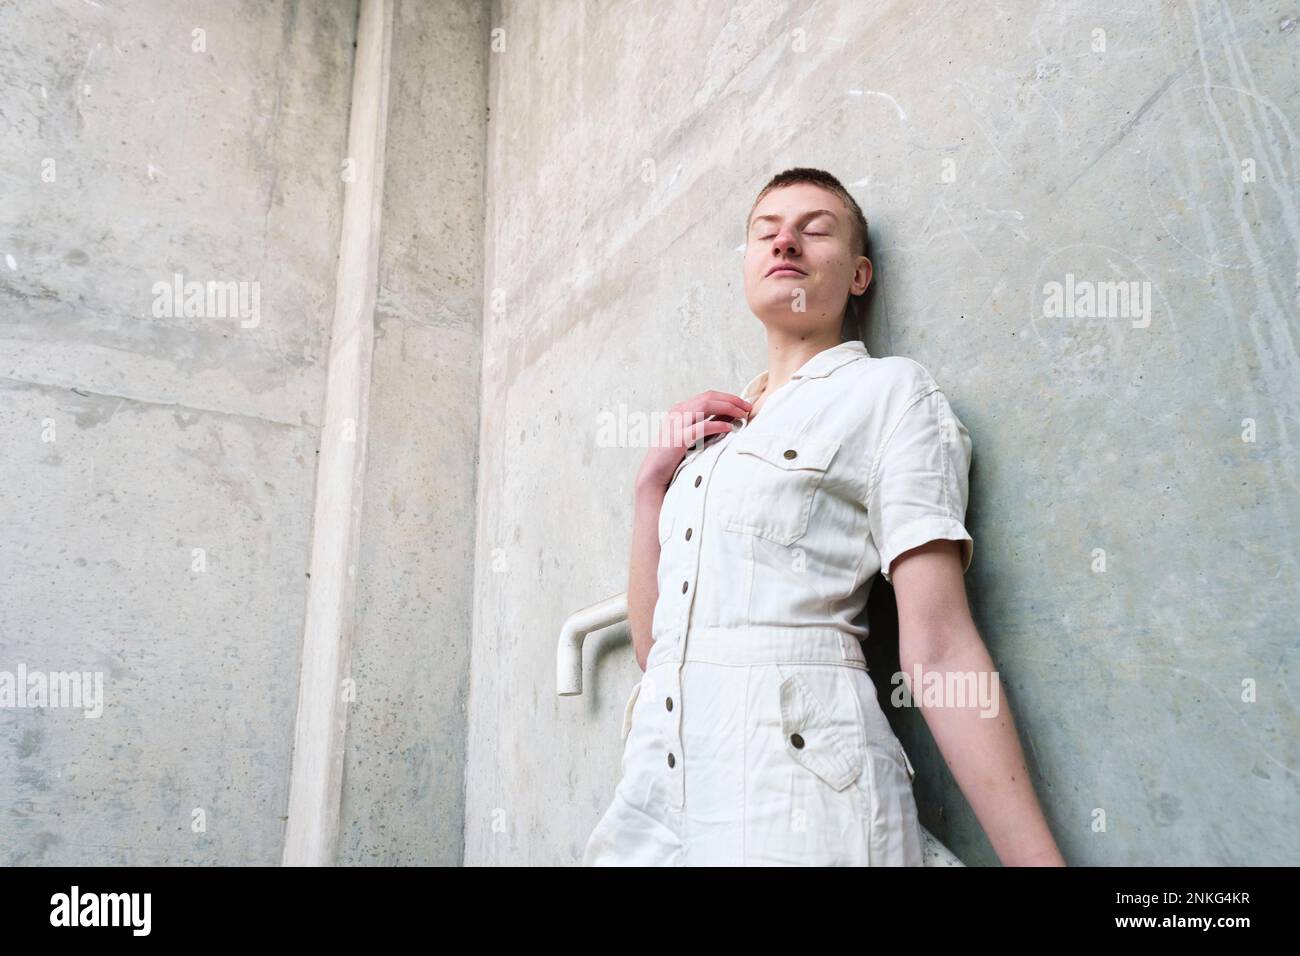 Non-binary person leaning on wall with eyes closed Stock Photo